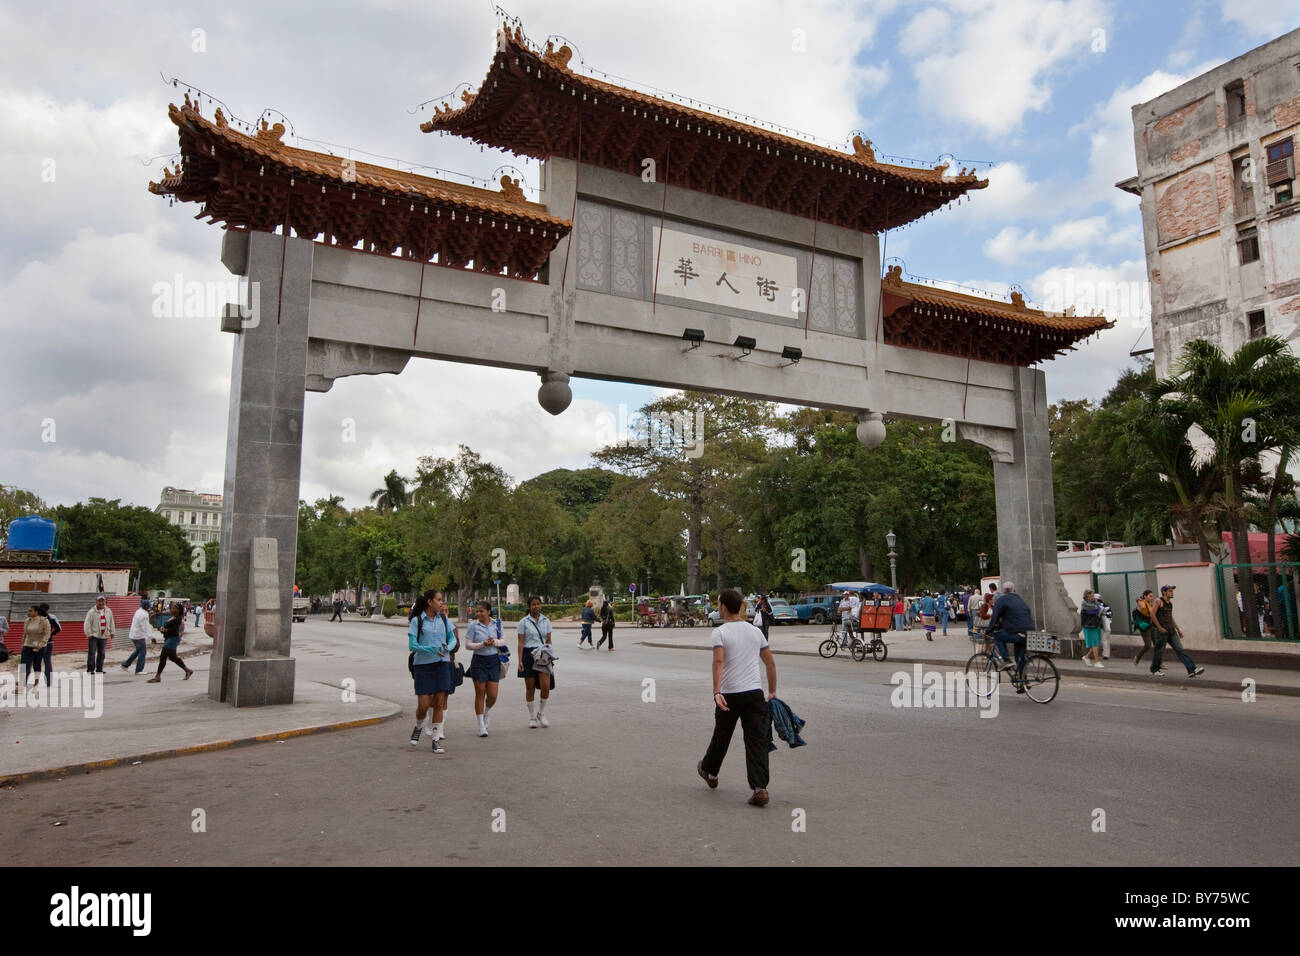 Cuba, Havana. Gate Marking Exit From China Town. Gift of the Republic of China. Schoolgirls in Uniform. Stock Photo